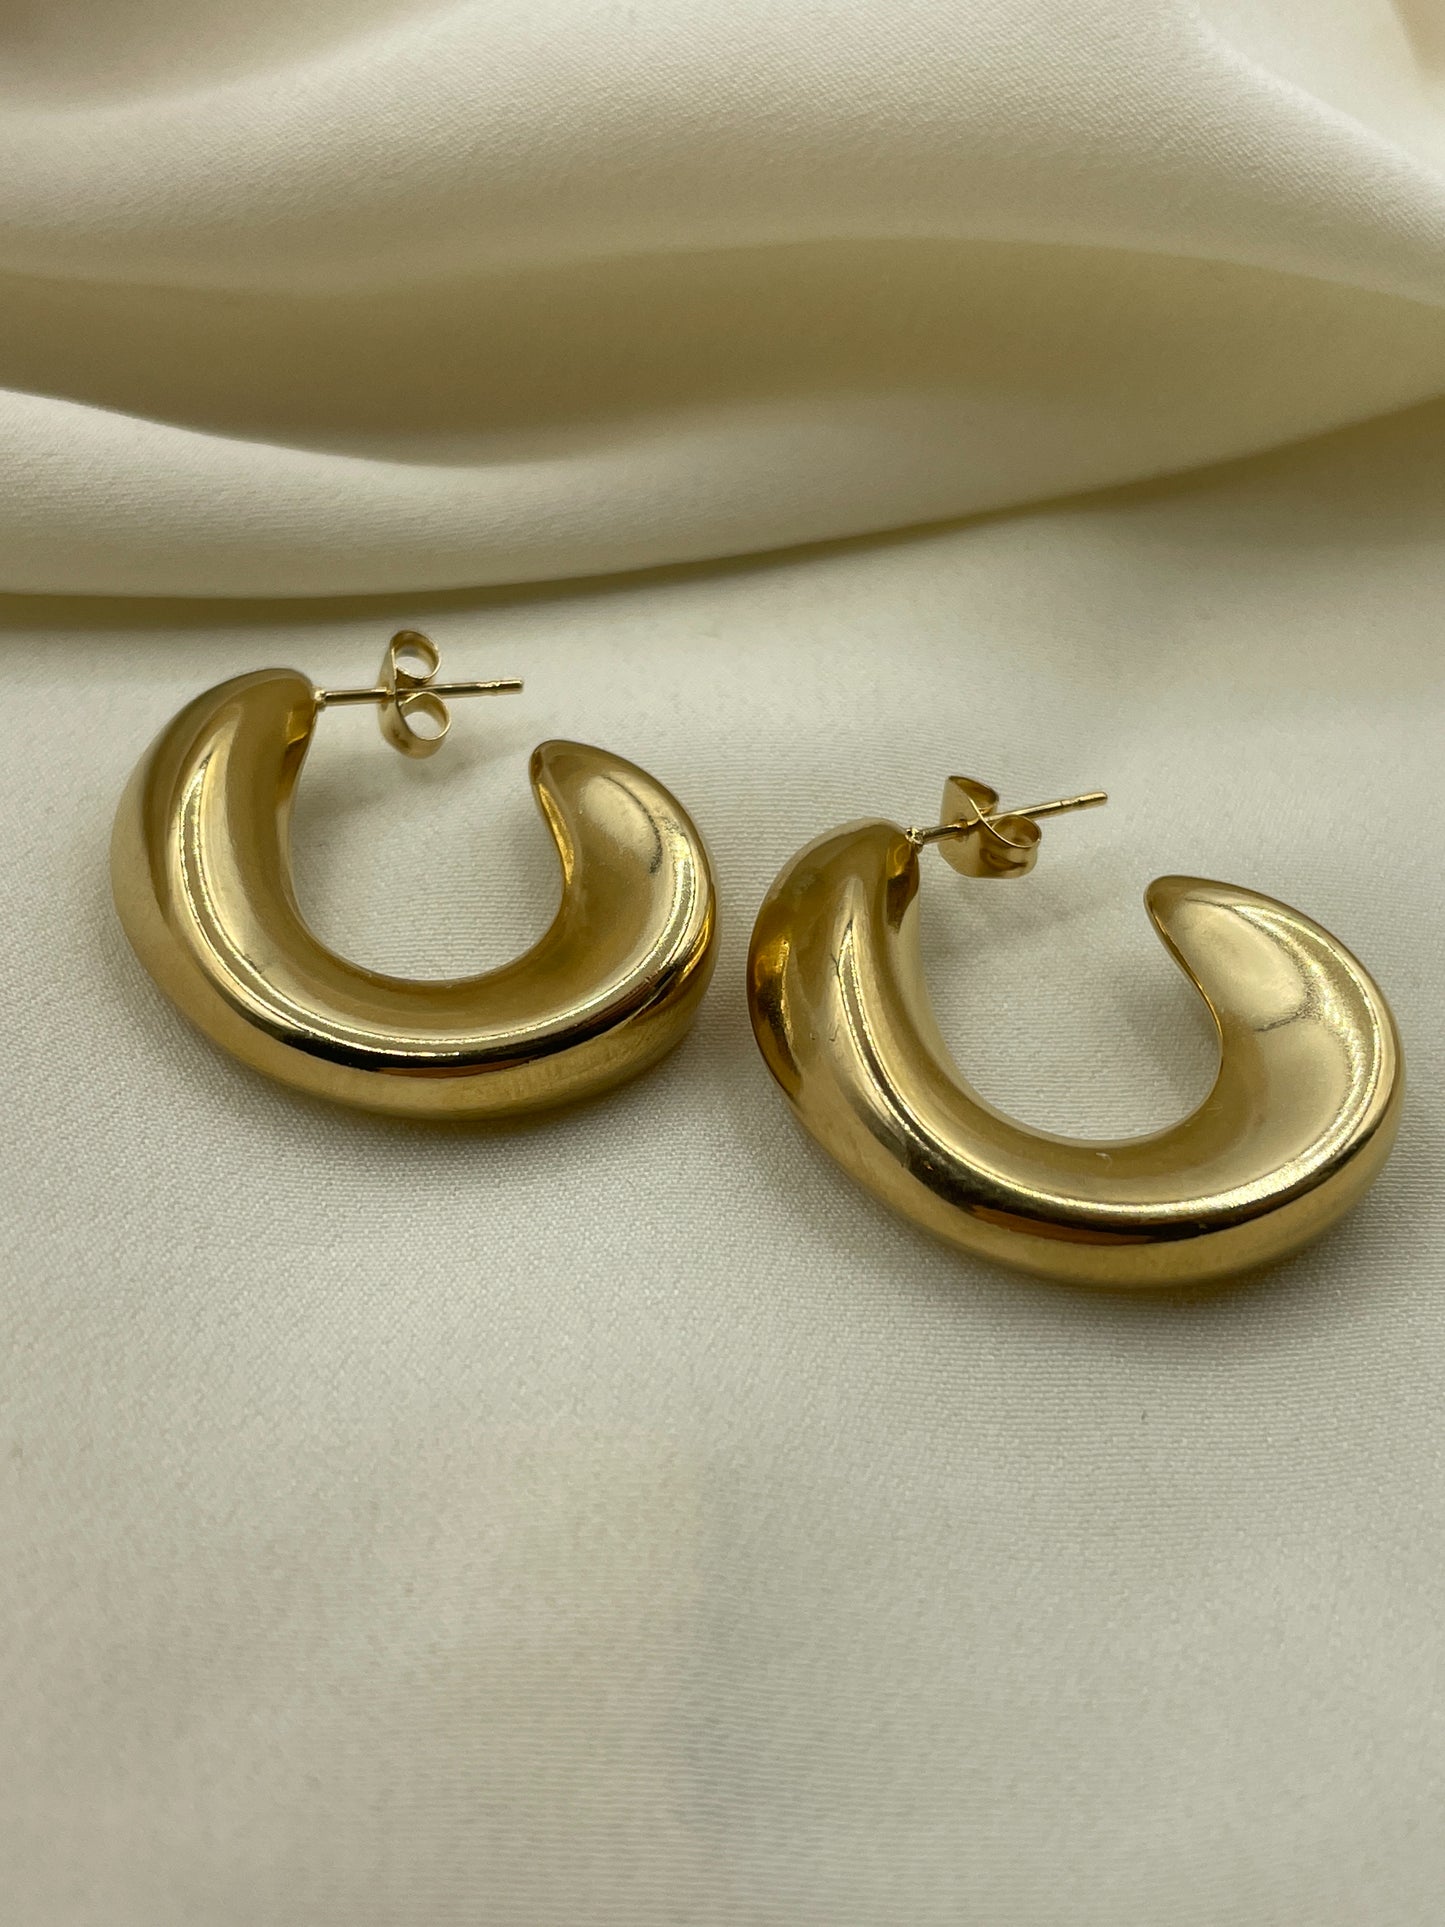 Large Concave Hoops Earrings Gold